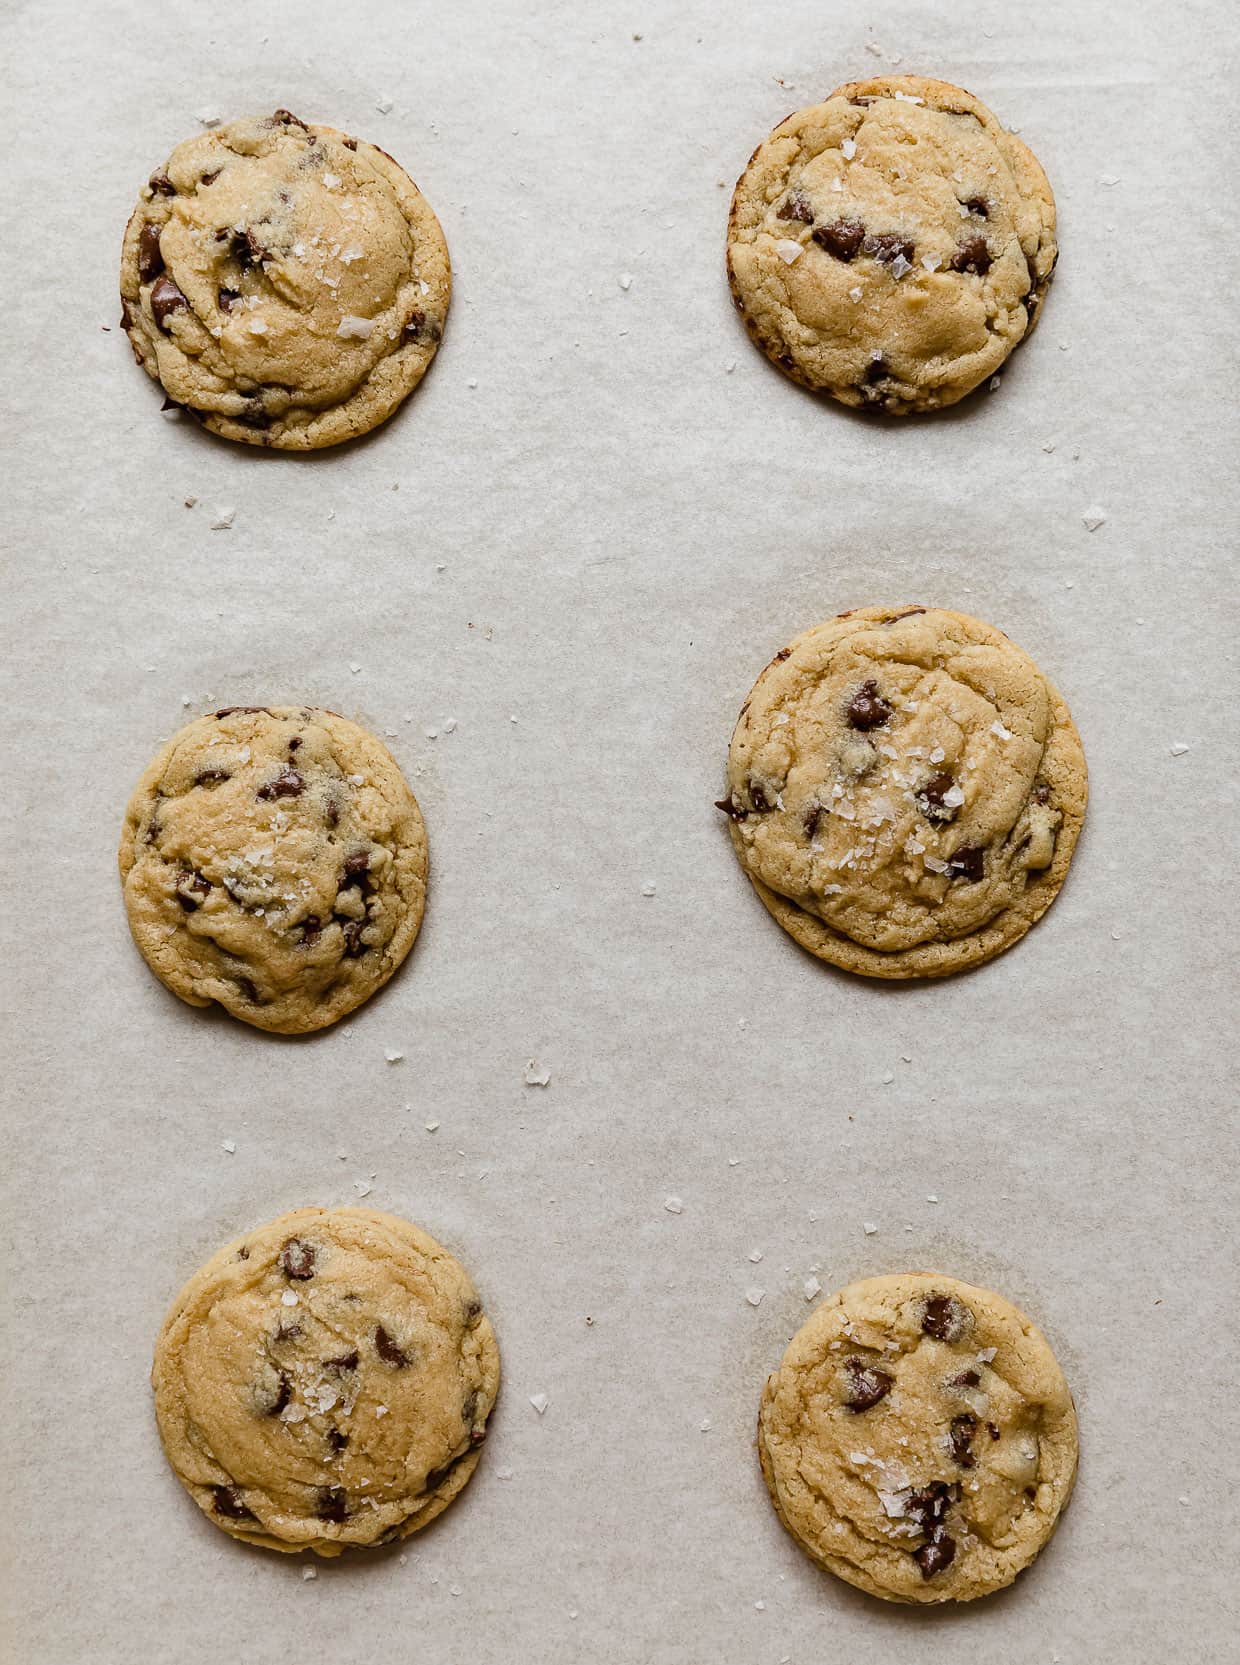 Six baked chocolate chip cookies on a white parchment lined baking sheet.